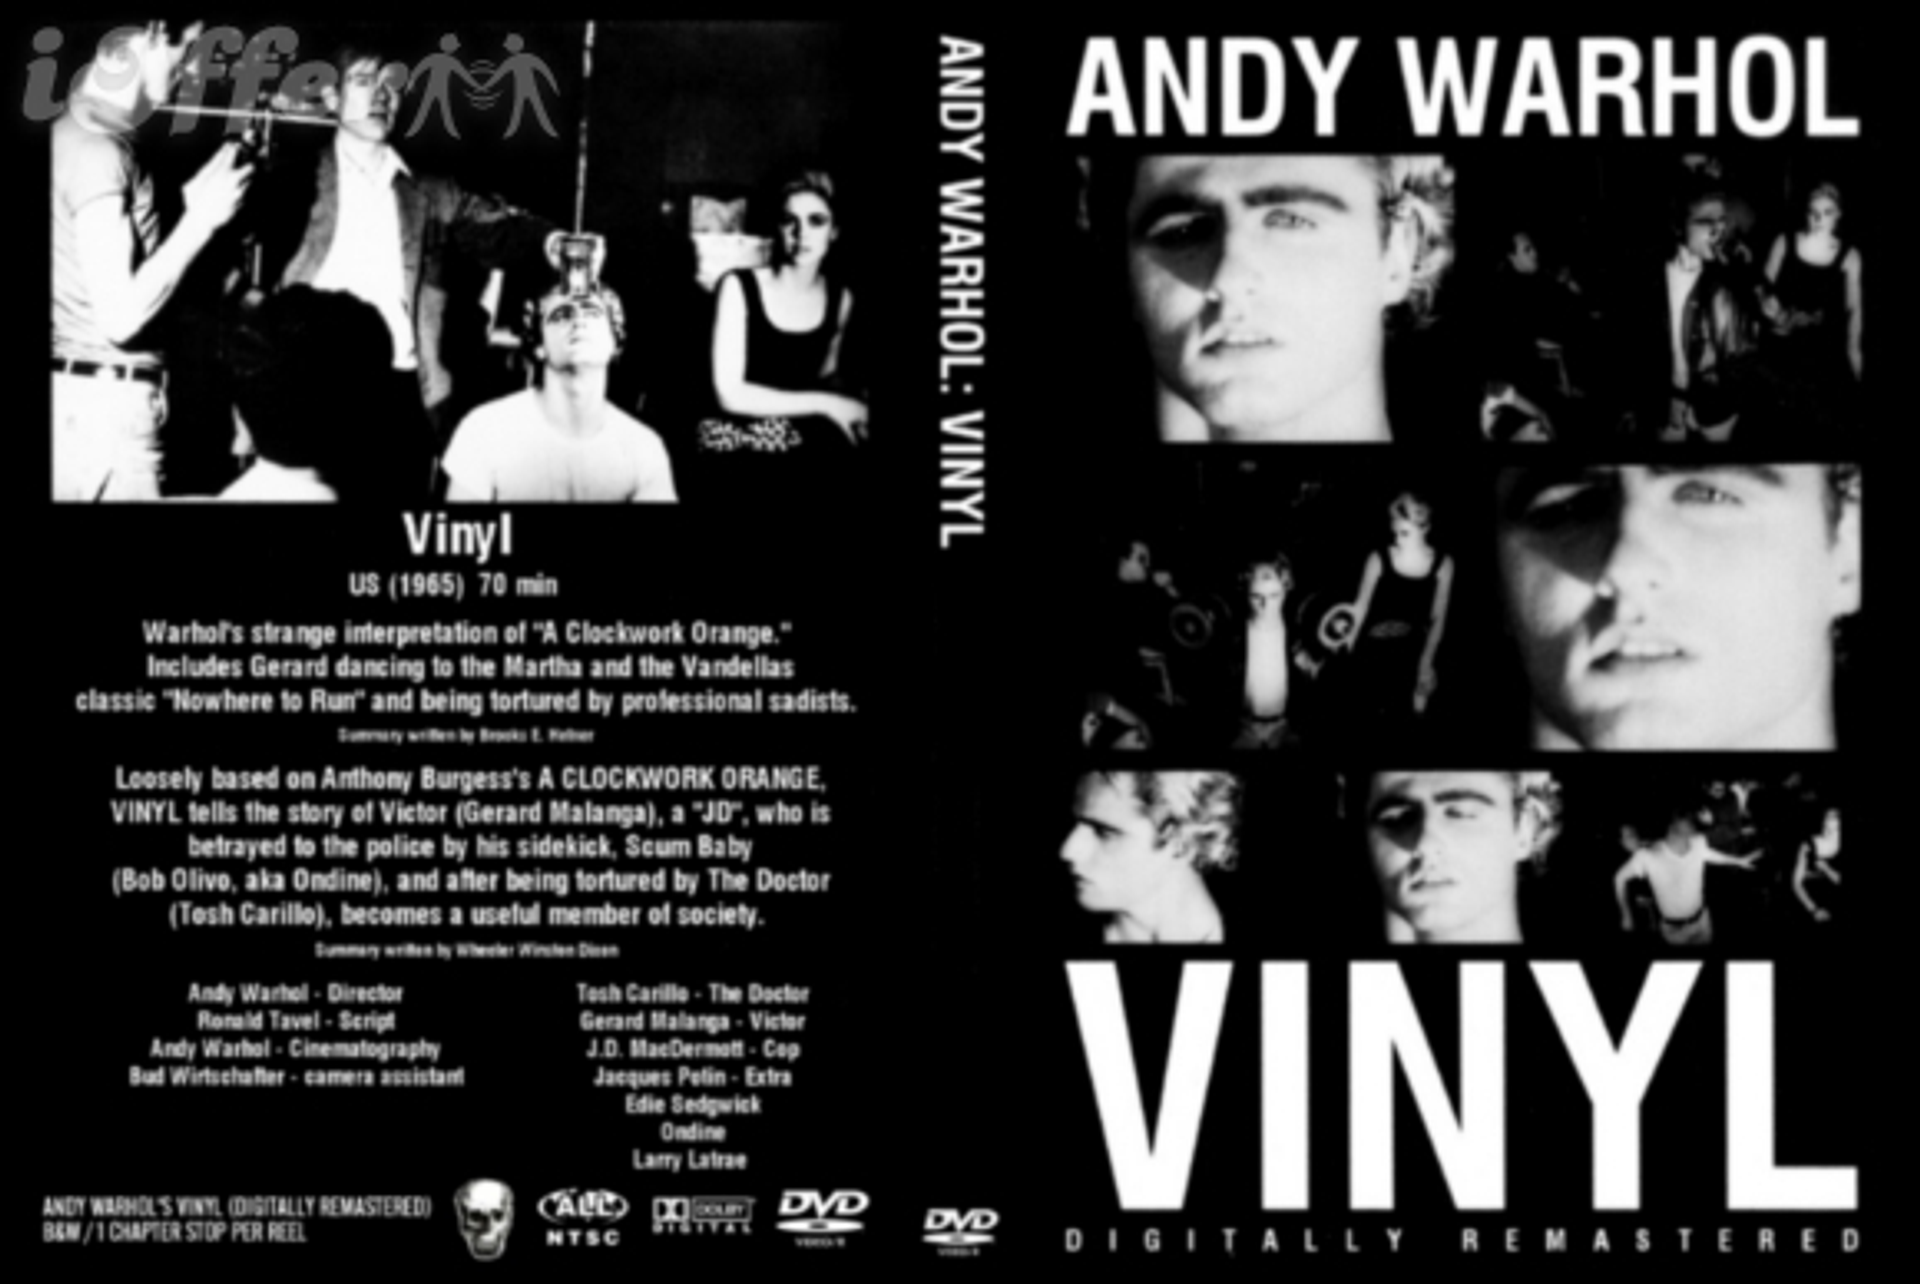 An image of the DVD poster for the movie Vinyl. It shows a collage of monochrome close-up portraits of the protagonists.